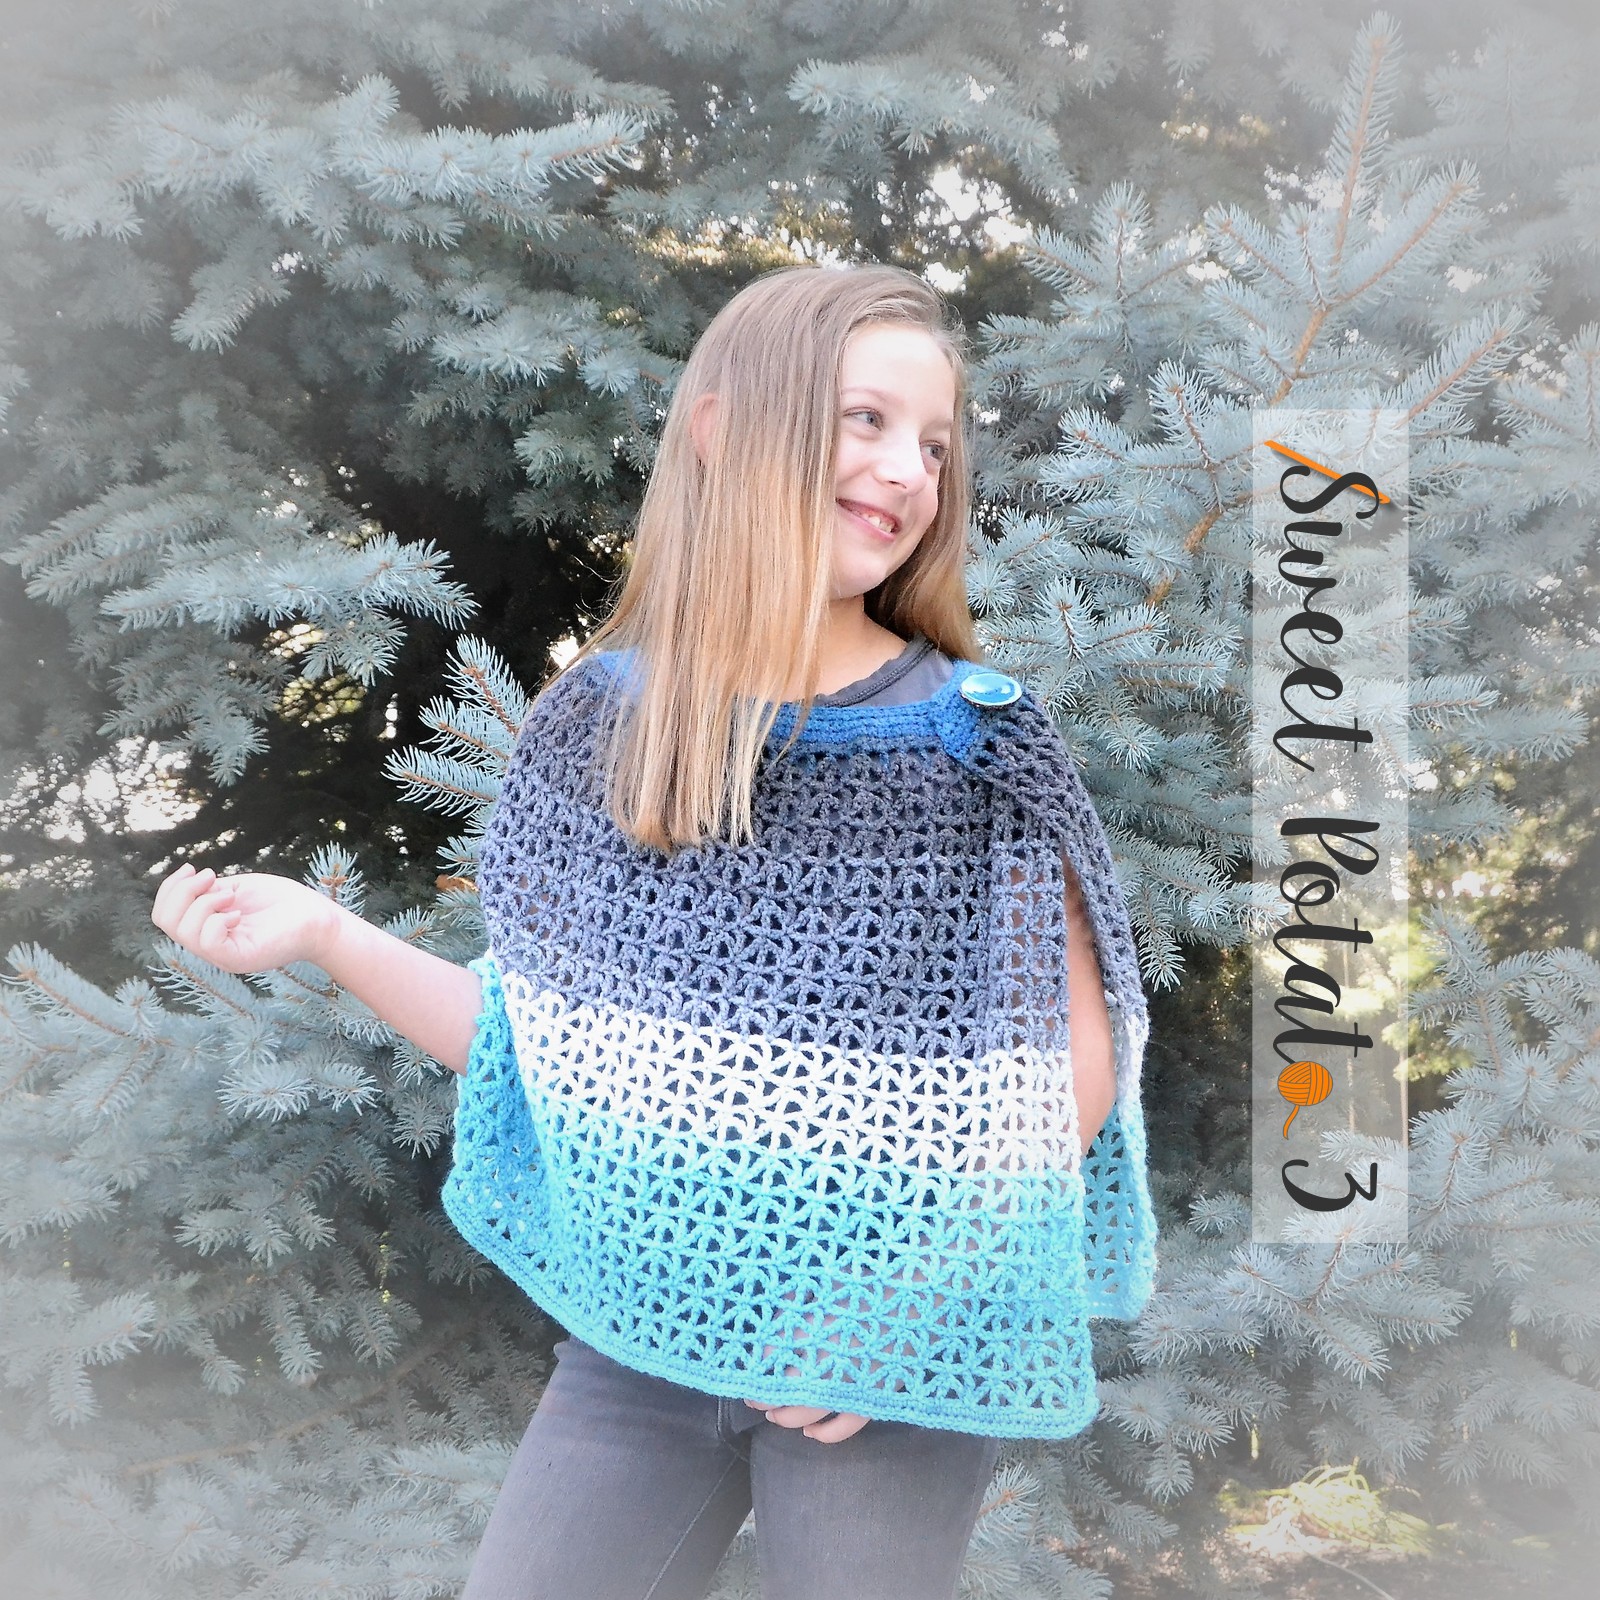 You are currently viewing Summer Daze Wrap: Crochet Patterns